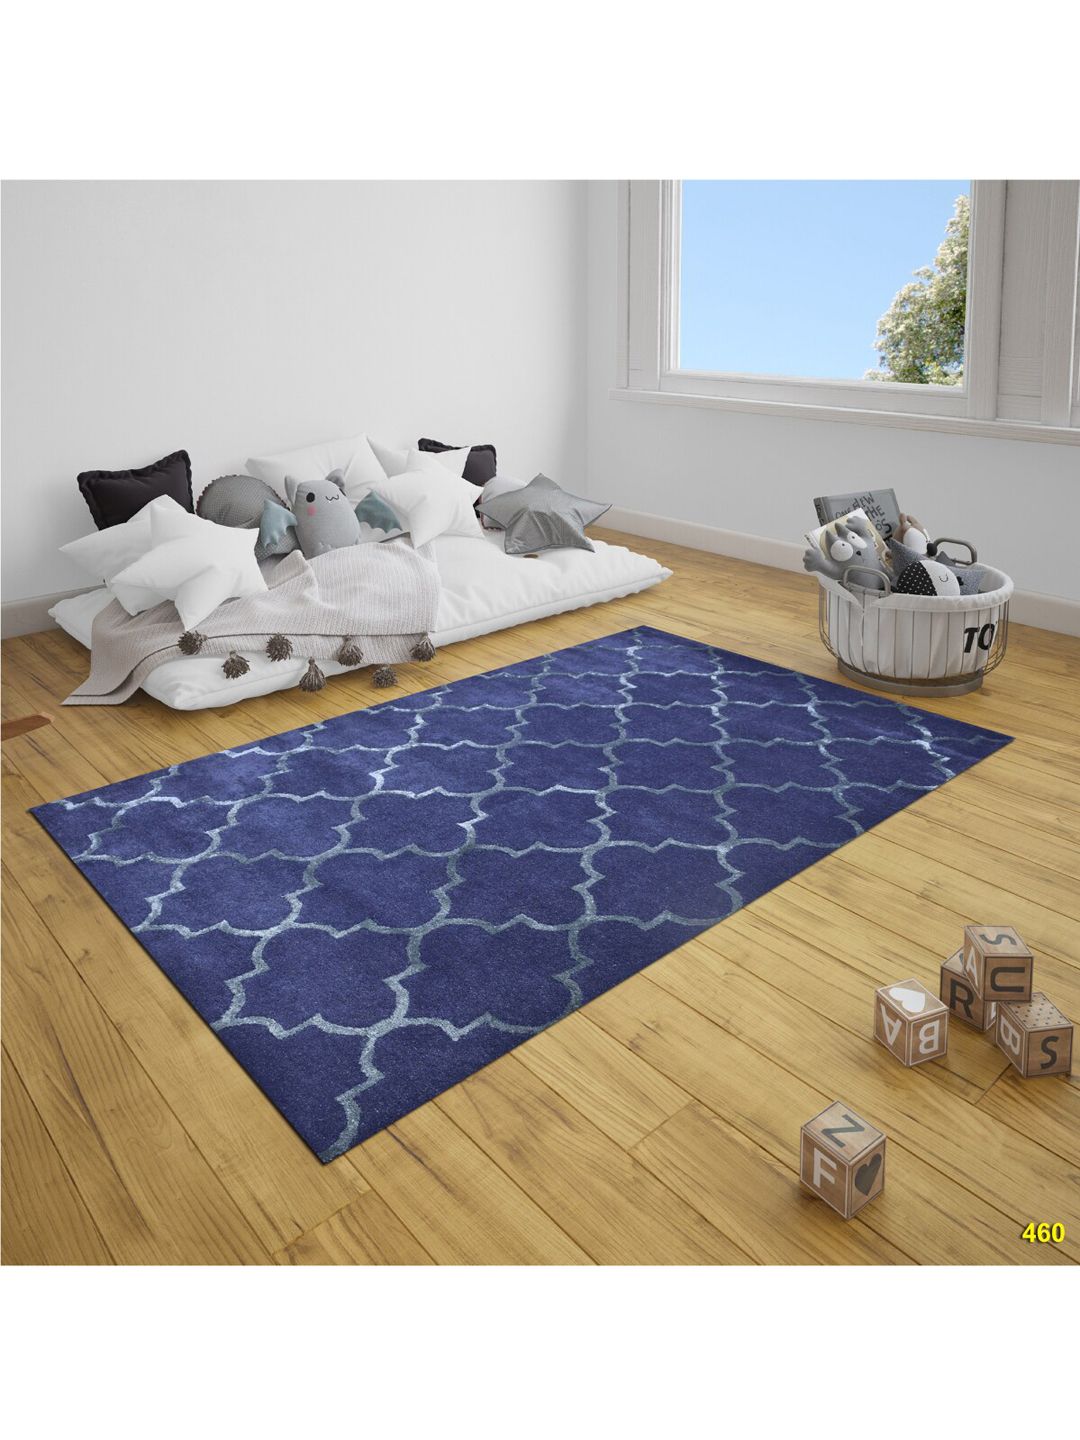 SANDED EDGE White & Blue Traditional Wool Floor Carpets Price in India